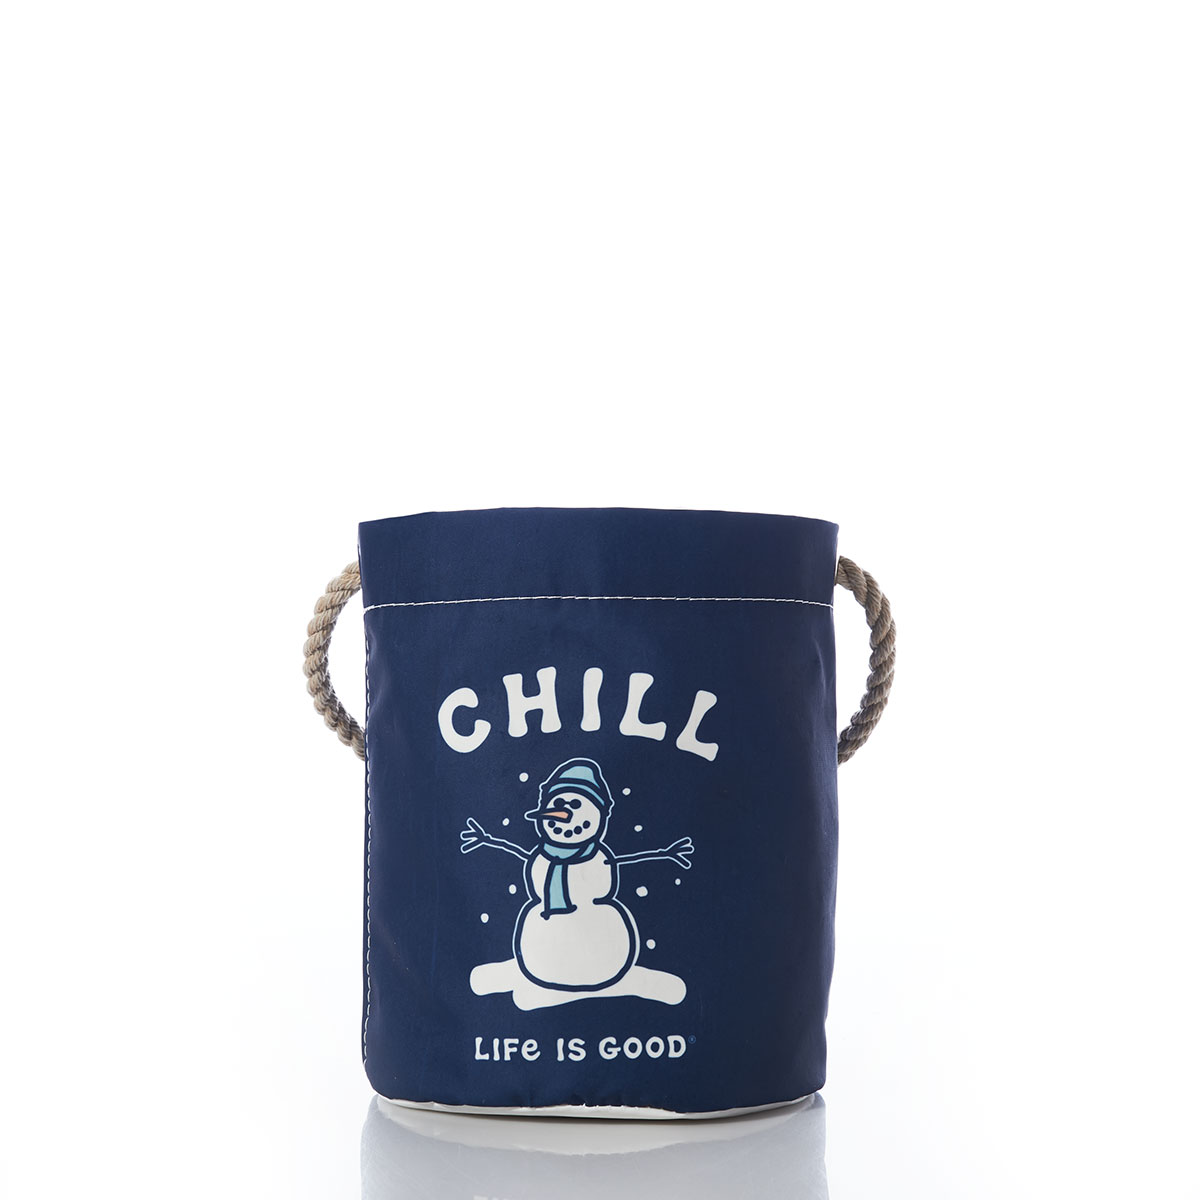 a navy blue recycled sail cloth bucket bag with a hemp handle is printed with the word chill and a snowman and the words life is good